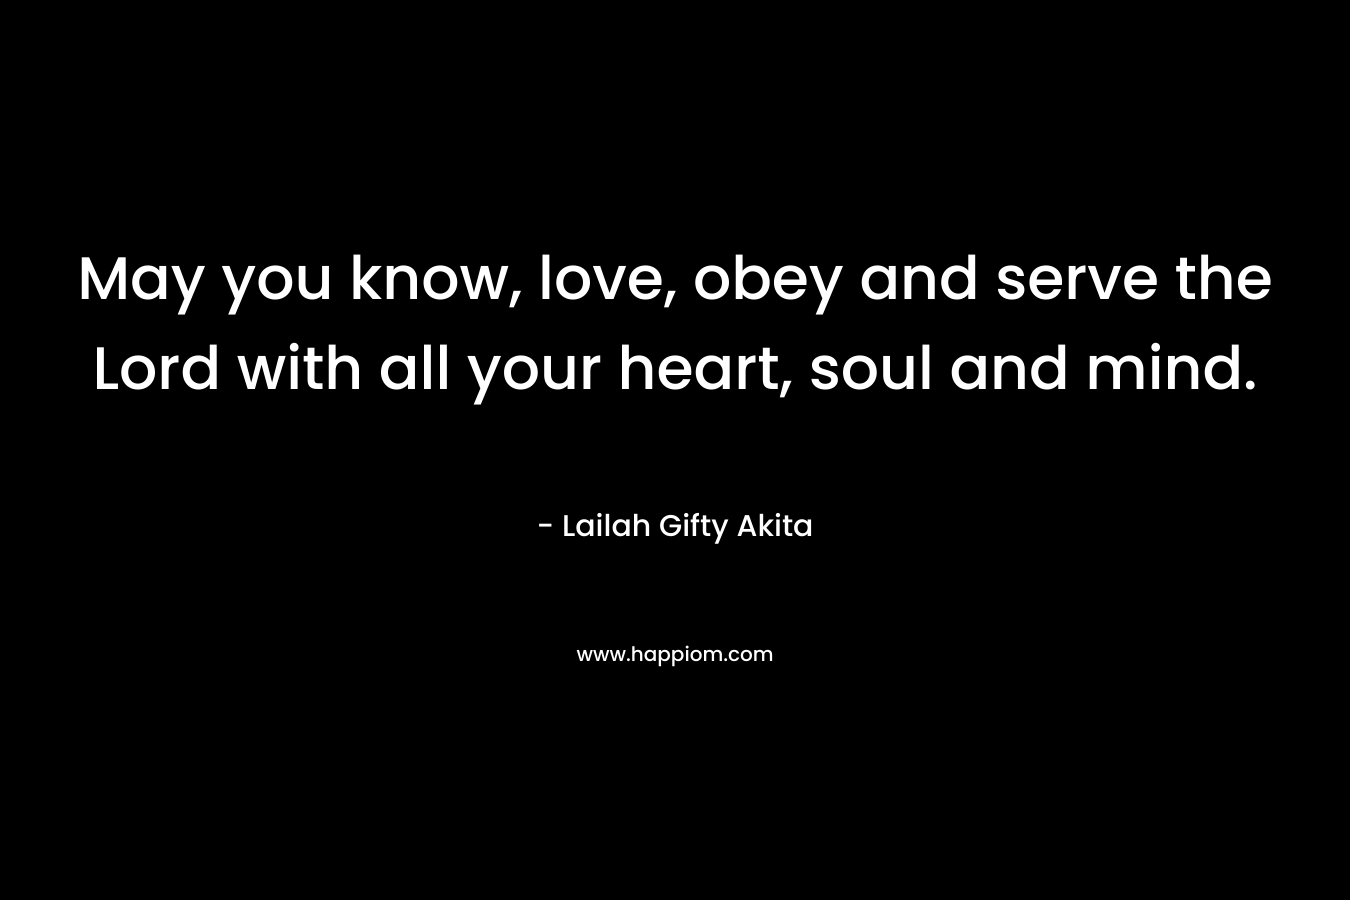 May you know, love, obey and serve the Lord with all your heart, soul and mind.